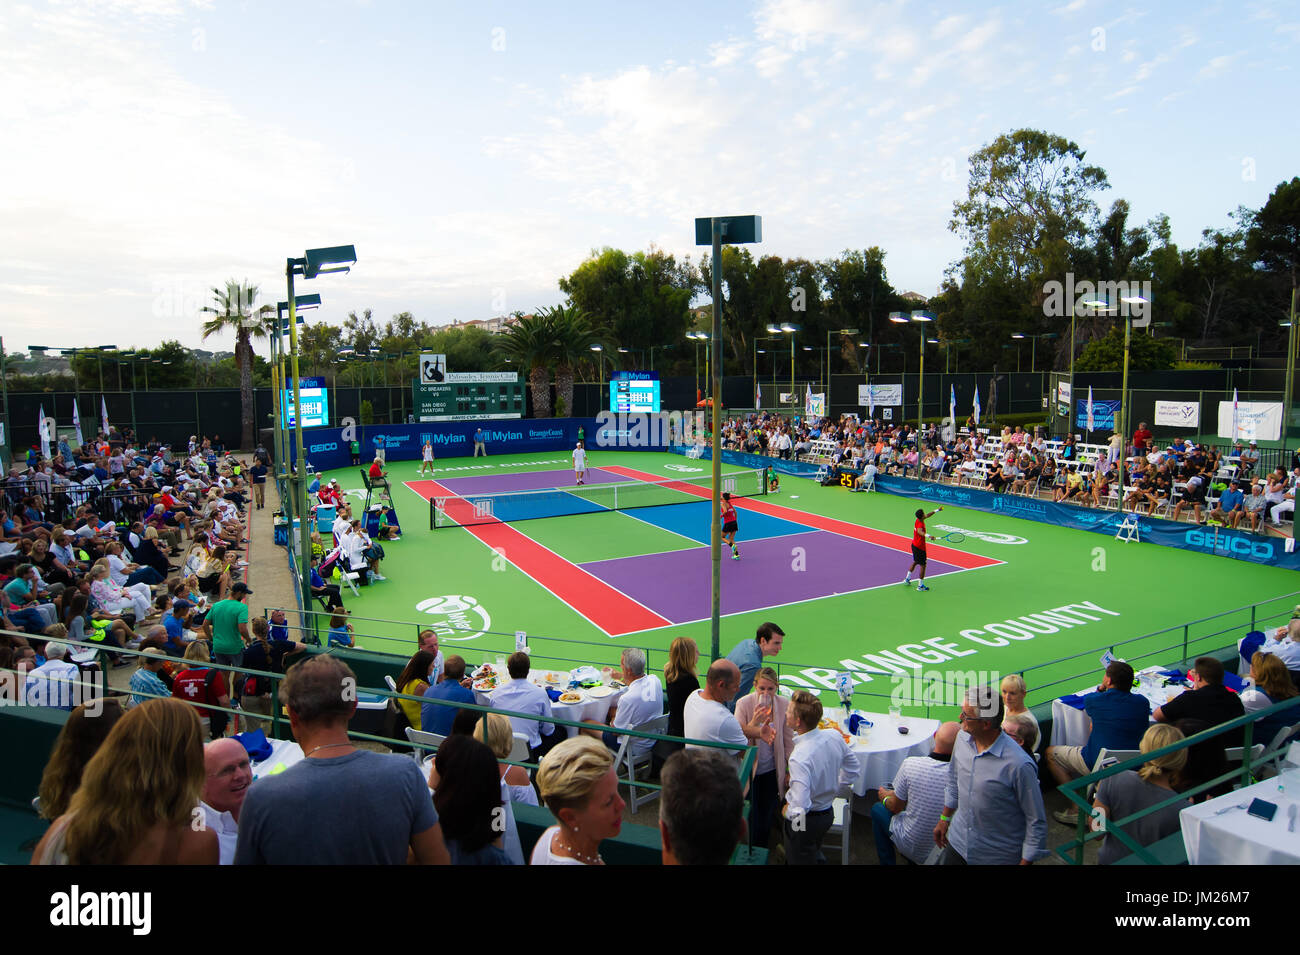 Newport Beach, United States. 24 July, 2017. Ambiance at the World Team Tennis match between the OC Breakers & San Diego Aviators © Jimmie48 Photography/Alamy Live News Stock Photo